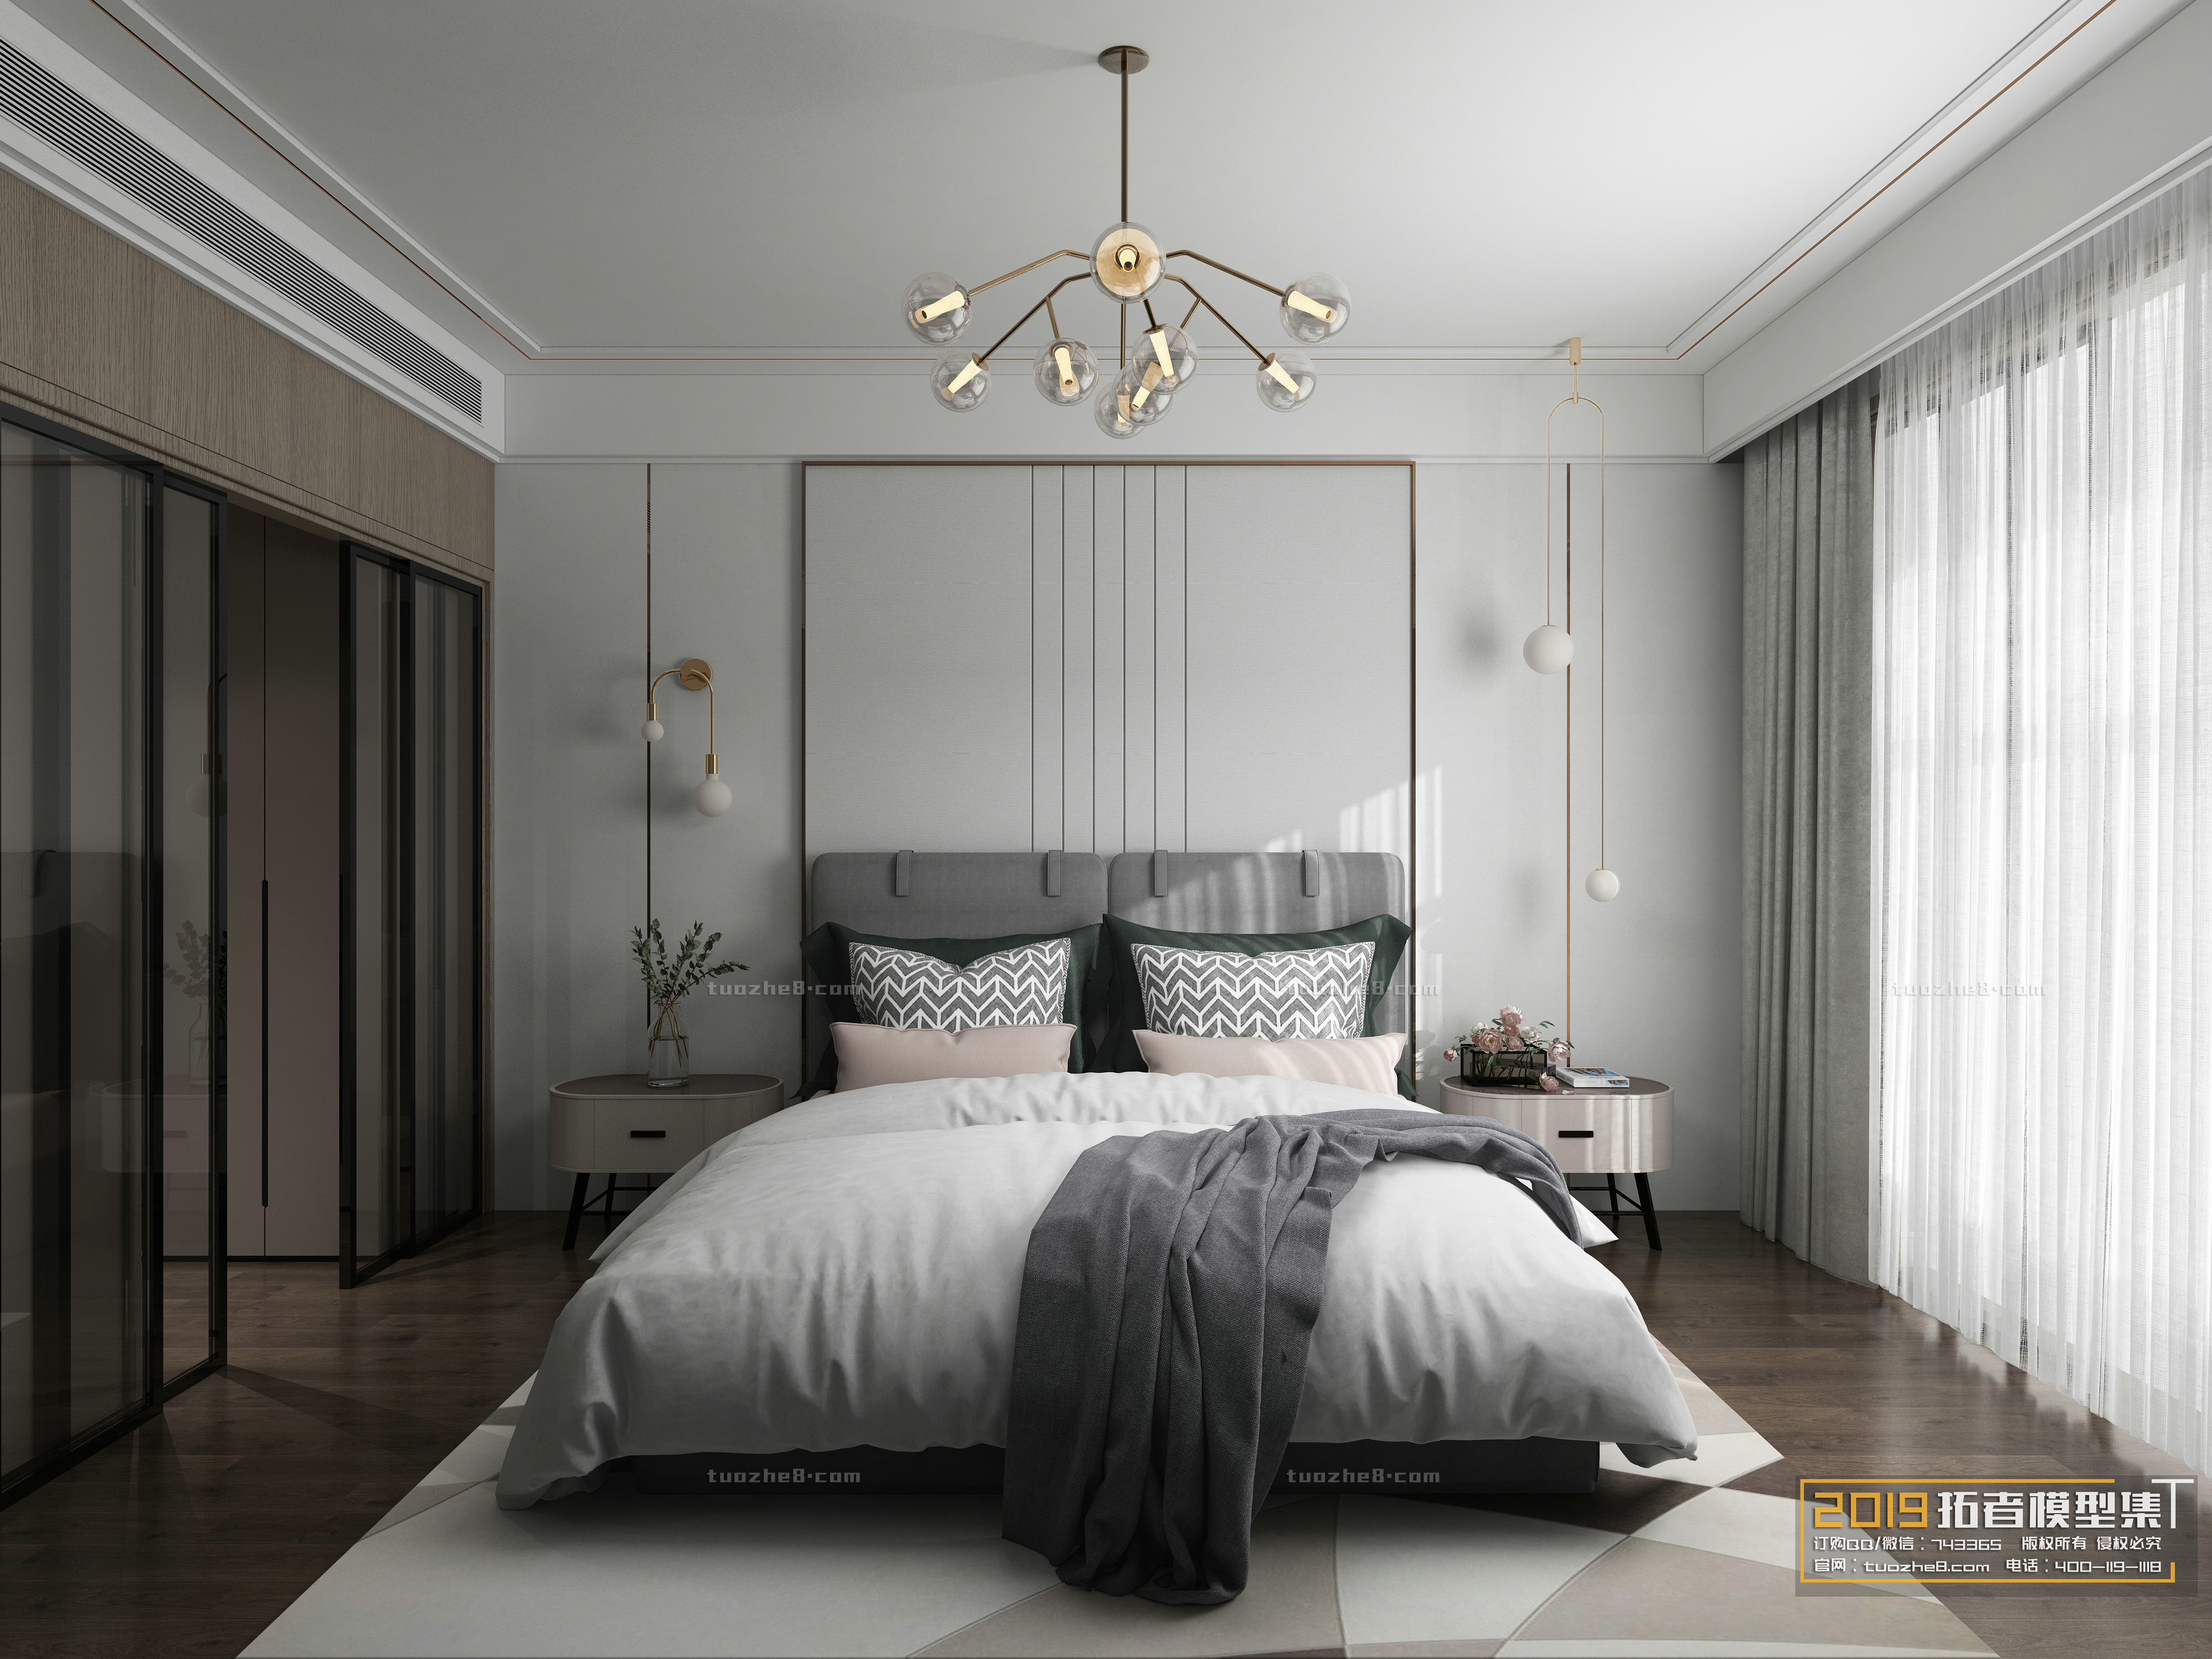 Extension Interior – BEDROOM – NORDIC STYLES – 012 - thumbnail 1